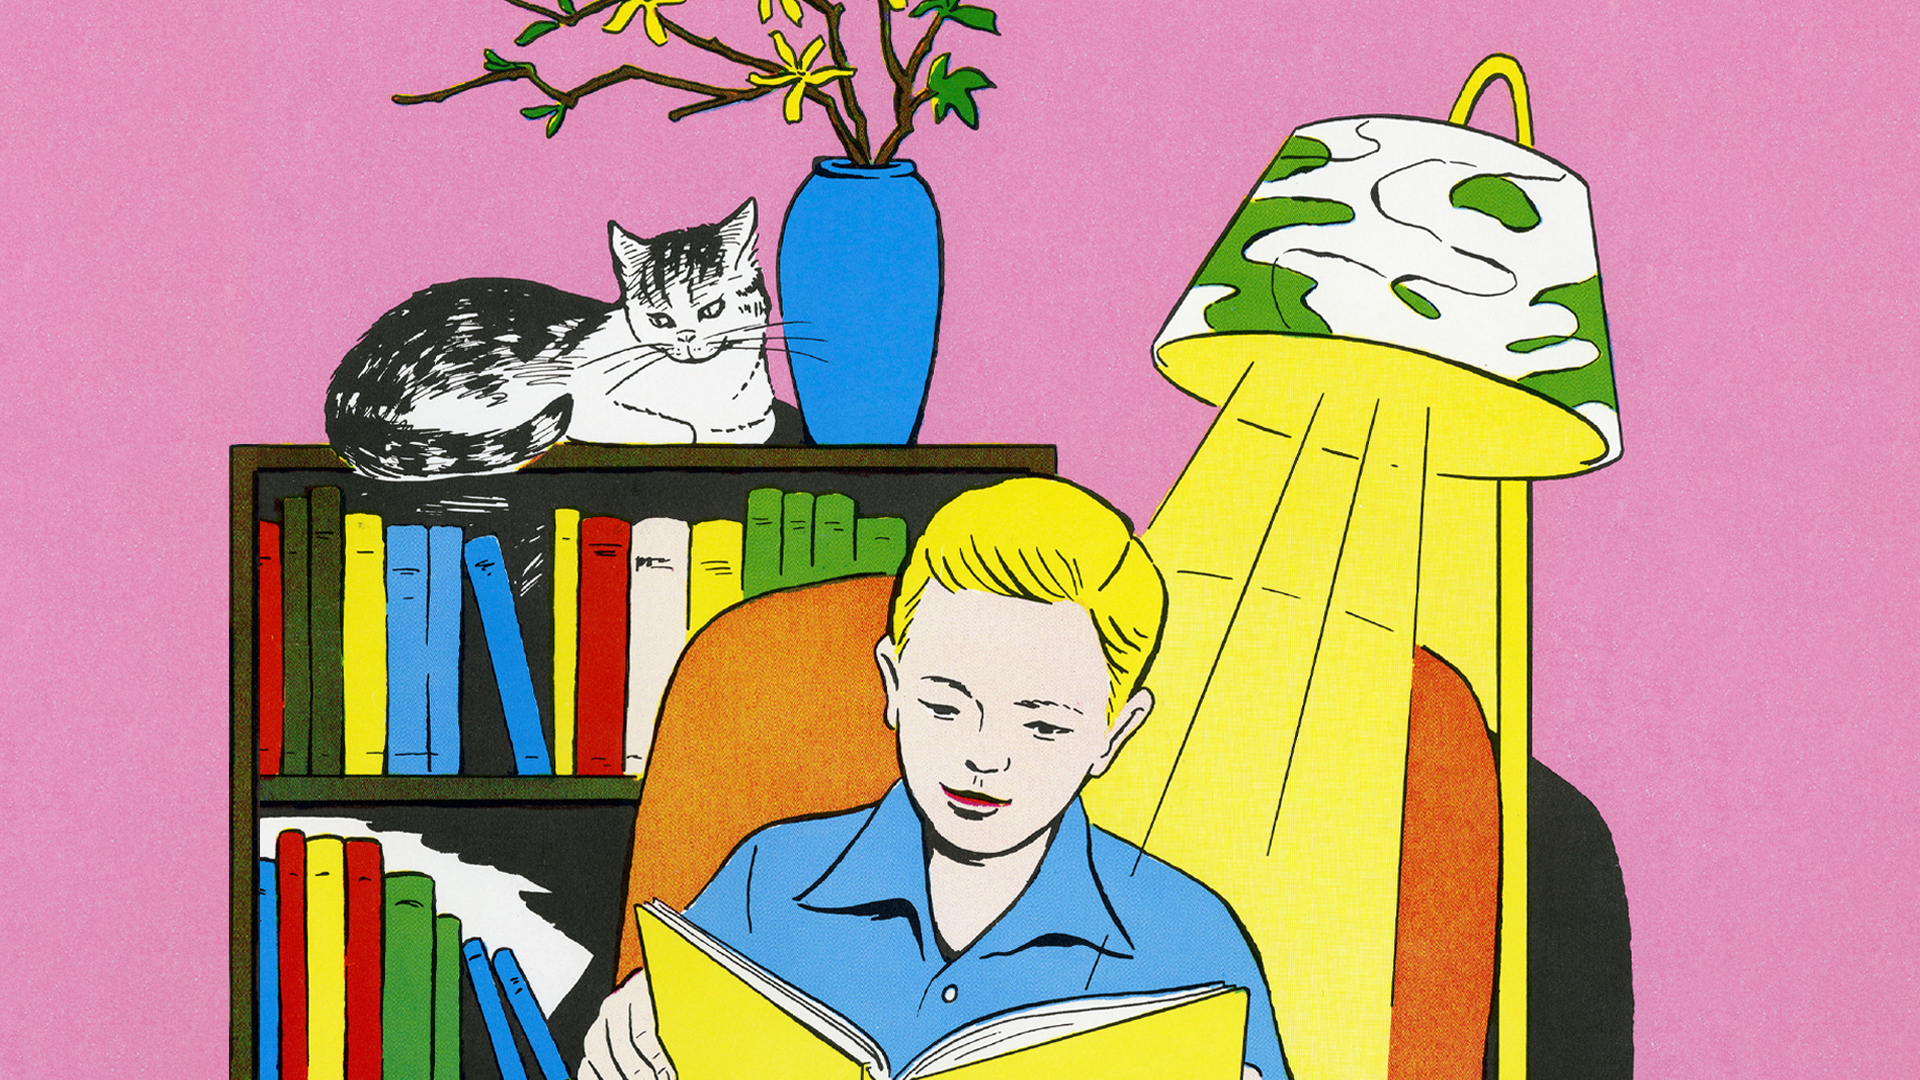 A colorful illustration of a person in a cozy-looking room reading a book by the light of a lamp while a cat lounges on a shelf above, possibly also reading the book.